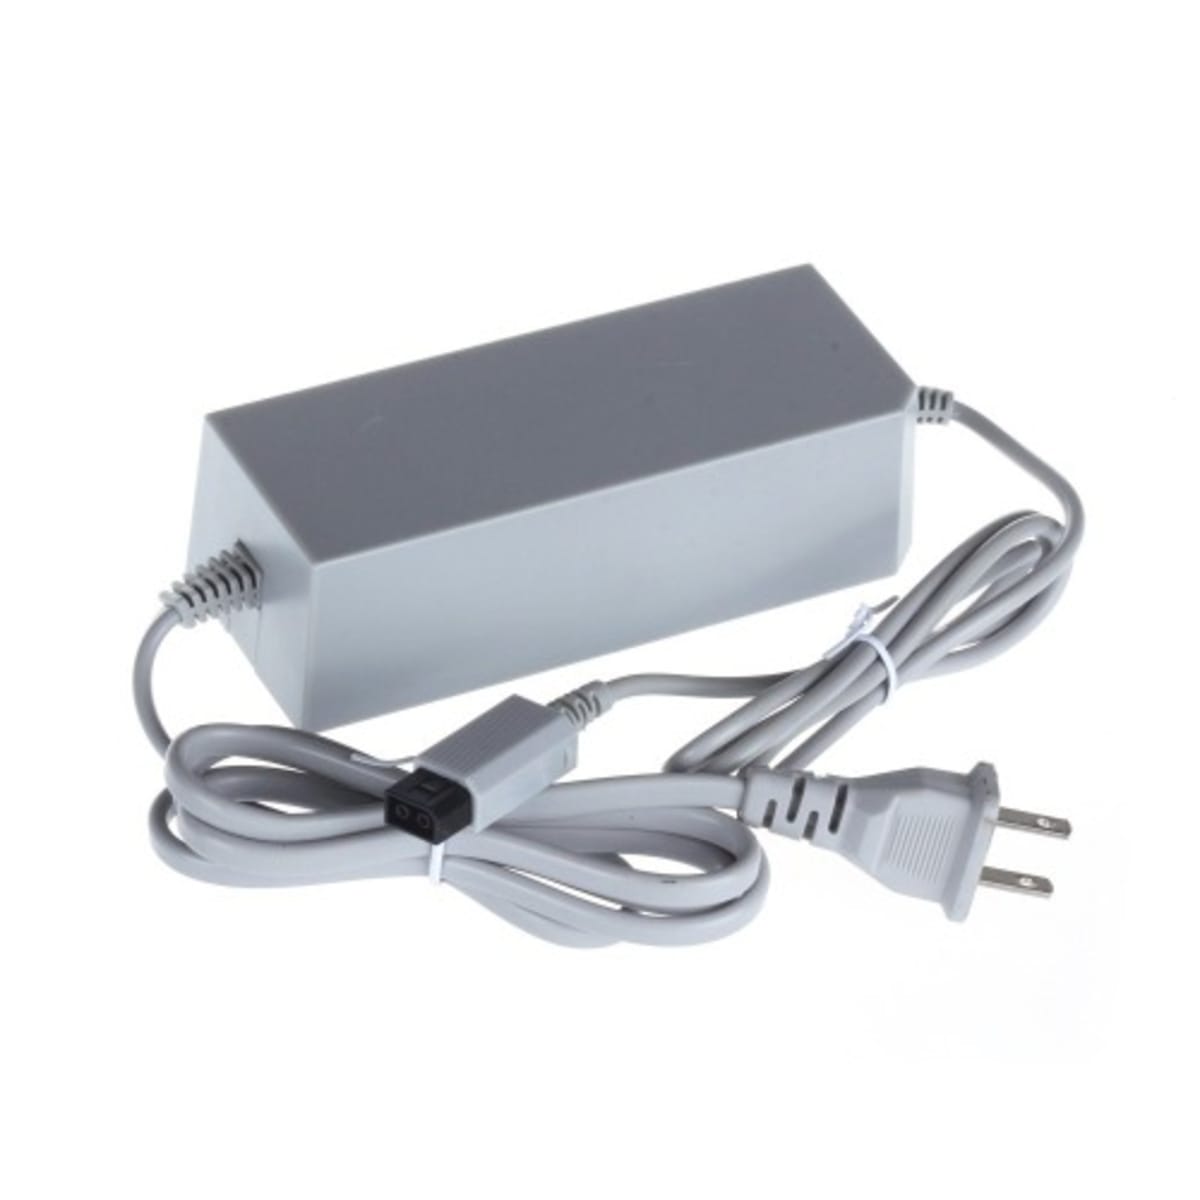 AC Power Adapter Block - AV Cable And Wired Motion Sensor Bar For Nintendo  Wii